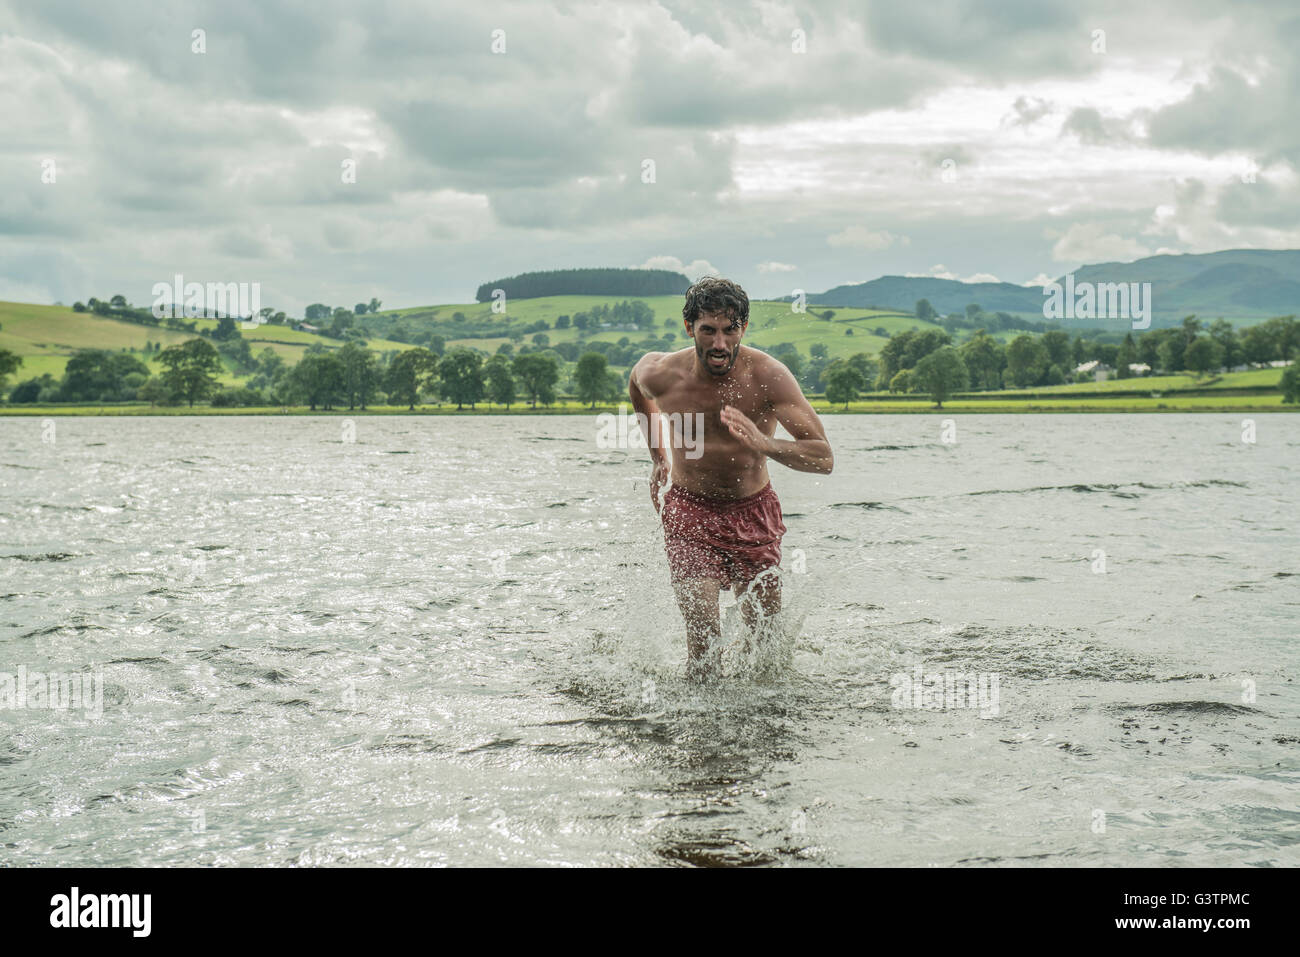 A fit man running through the shallow water of Bala Lake in Wales. Stock Photo